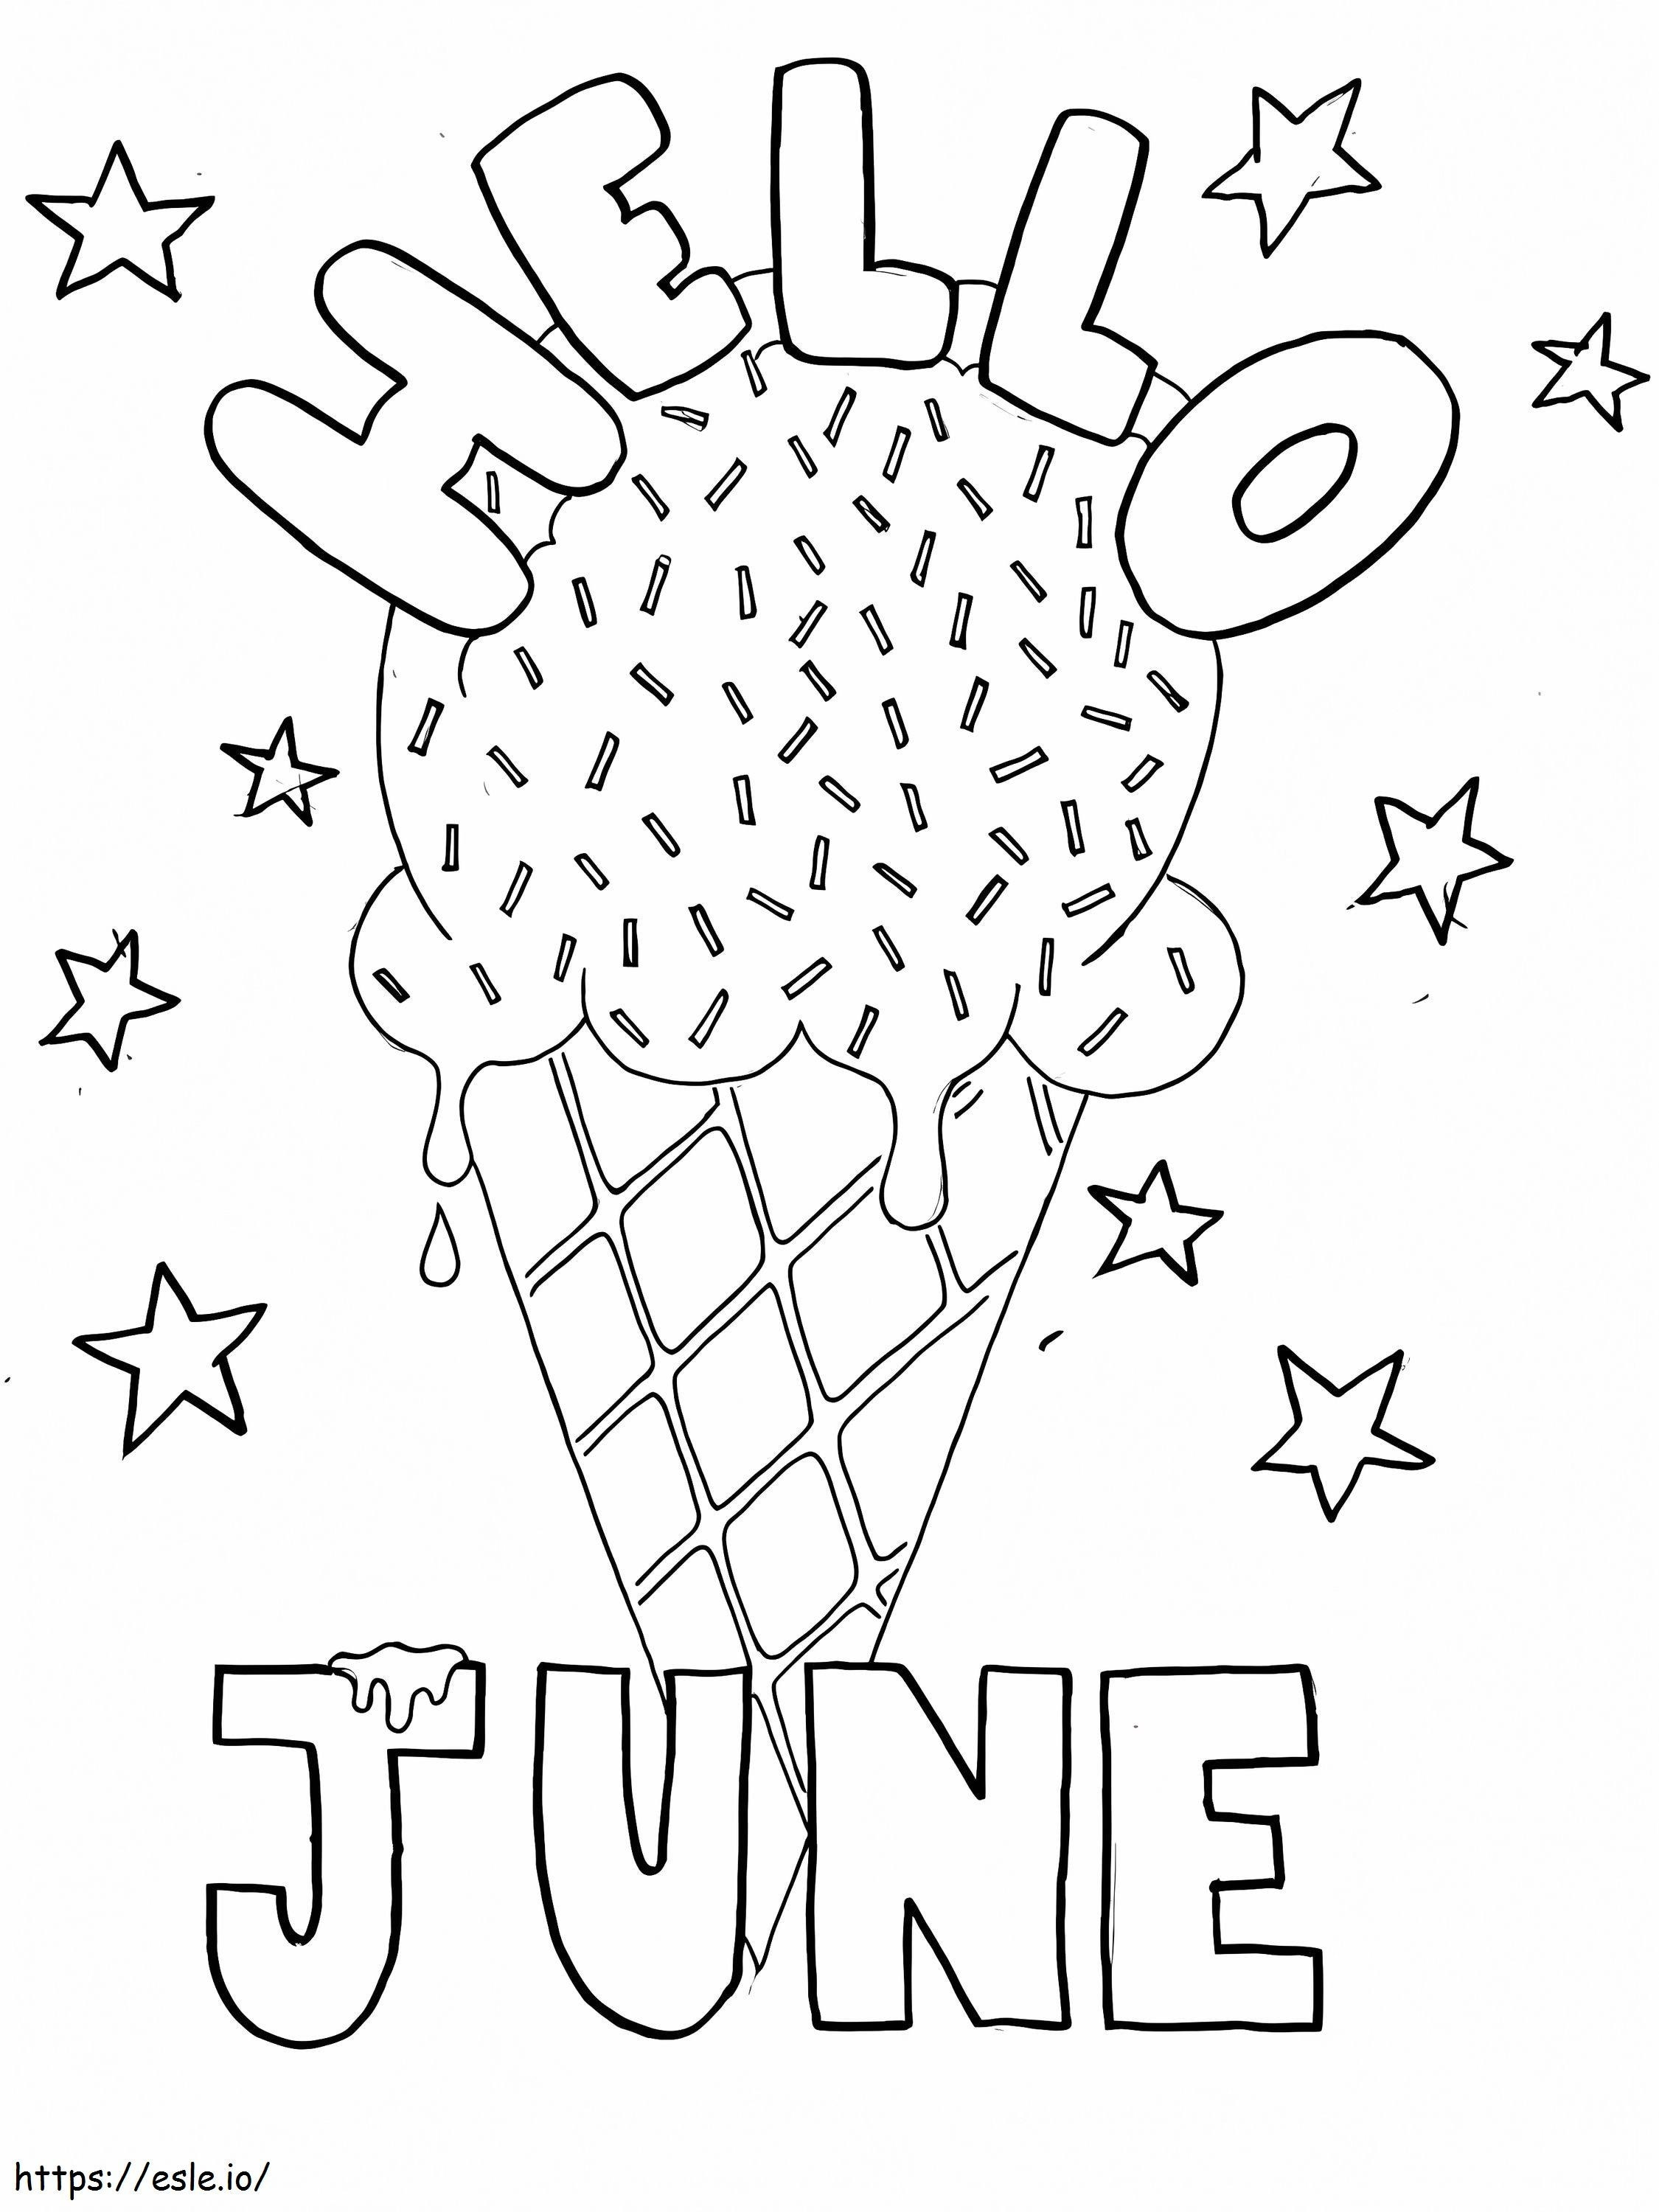 Hello June 1 coloring page